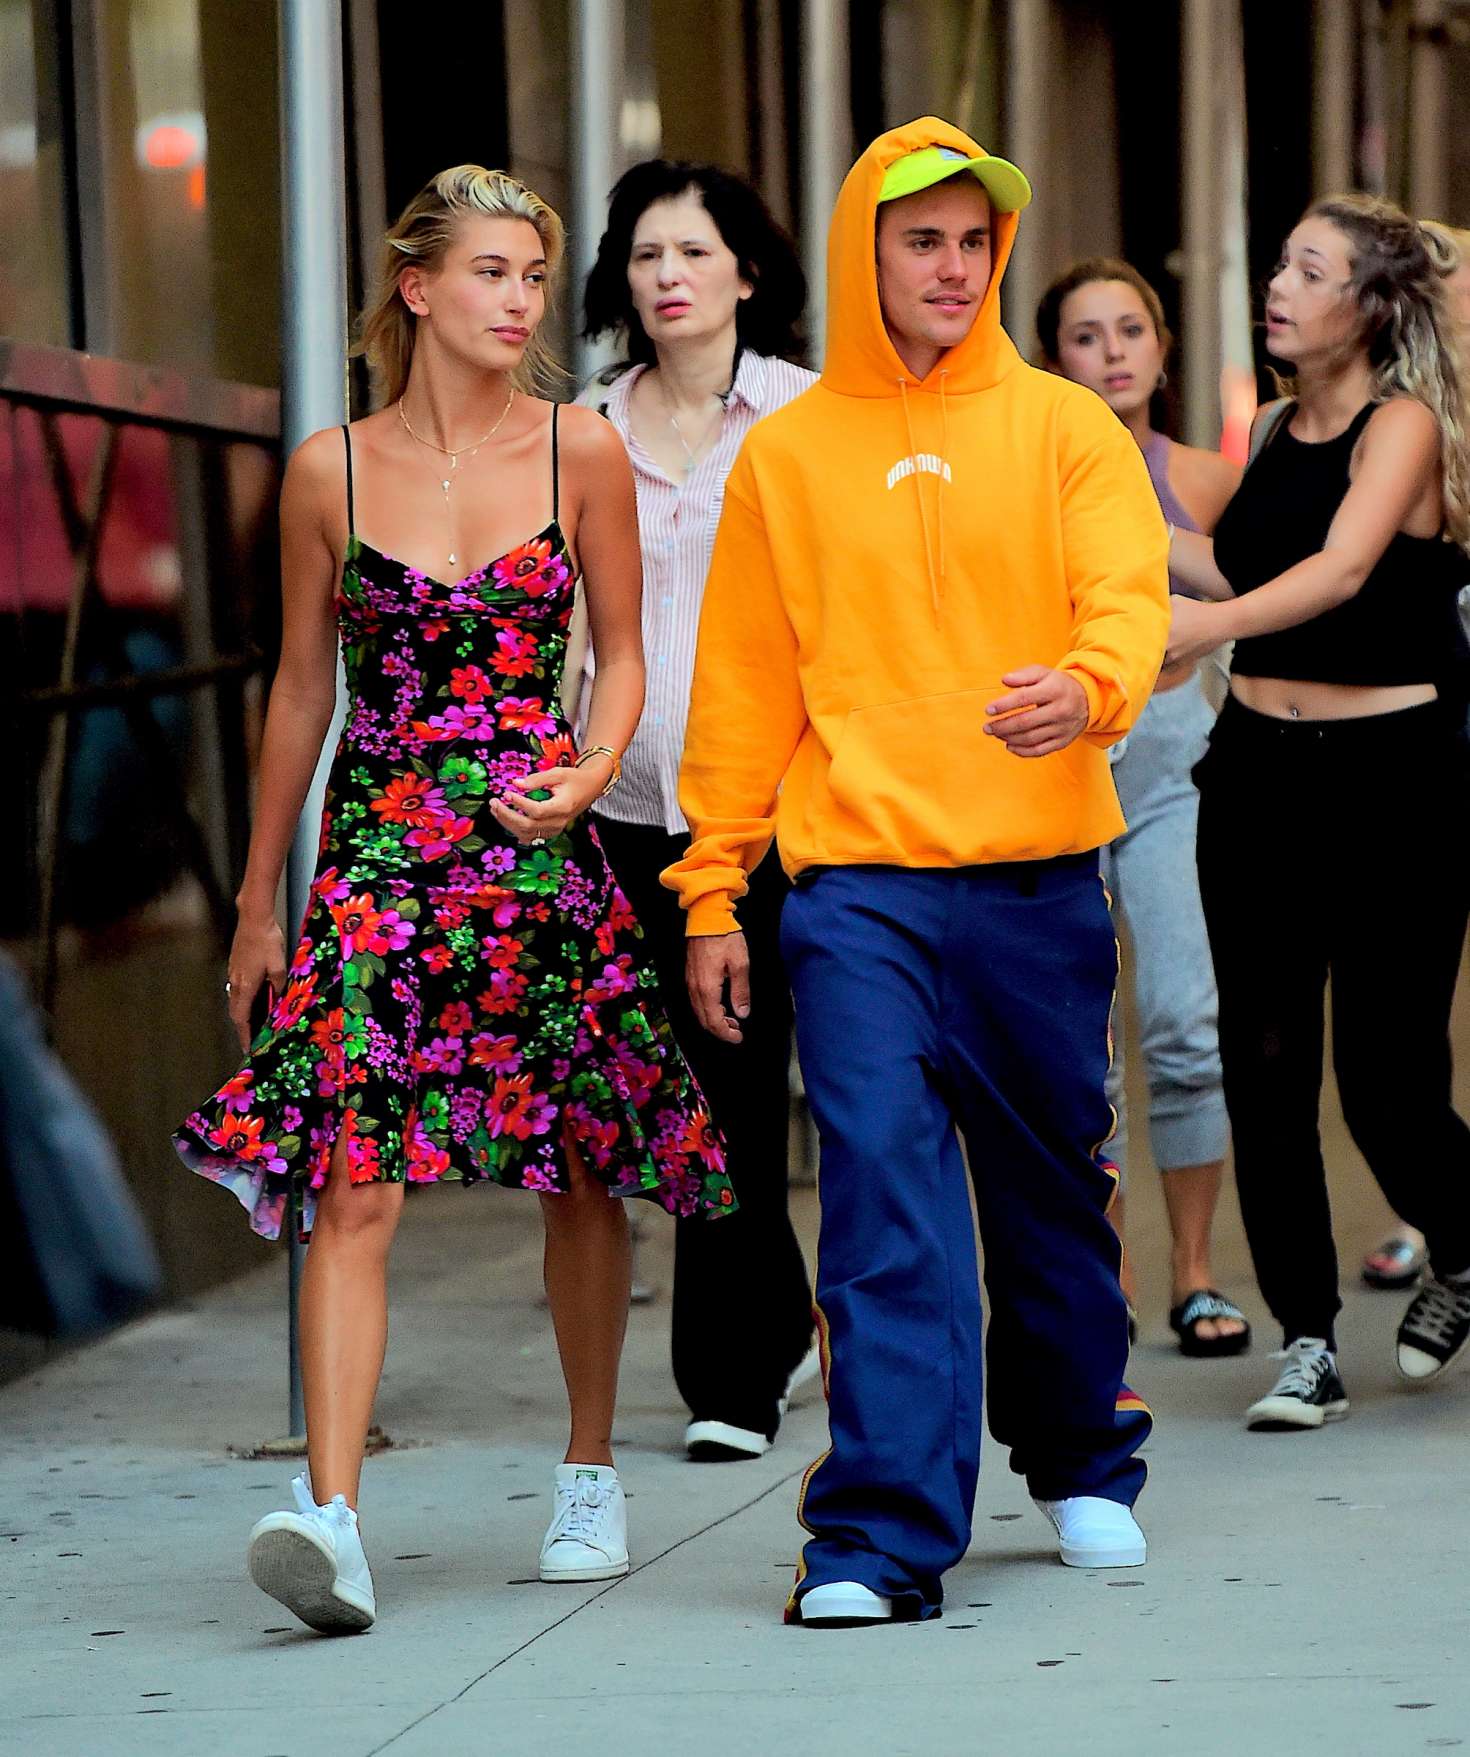 Hailey Baldwin and Justin Bieber â€“ Out and about in New York City